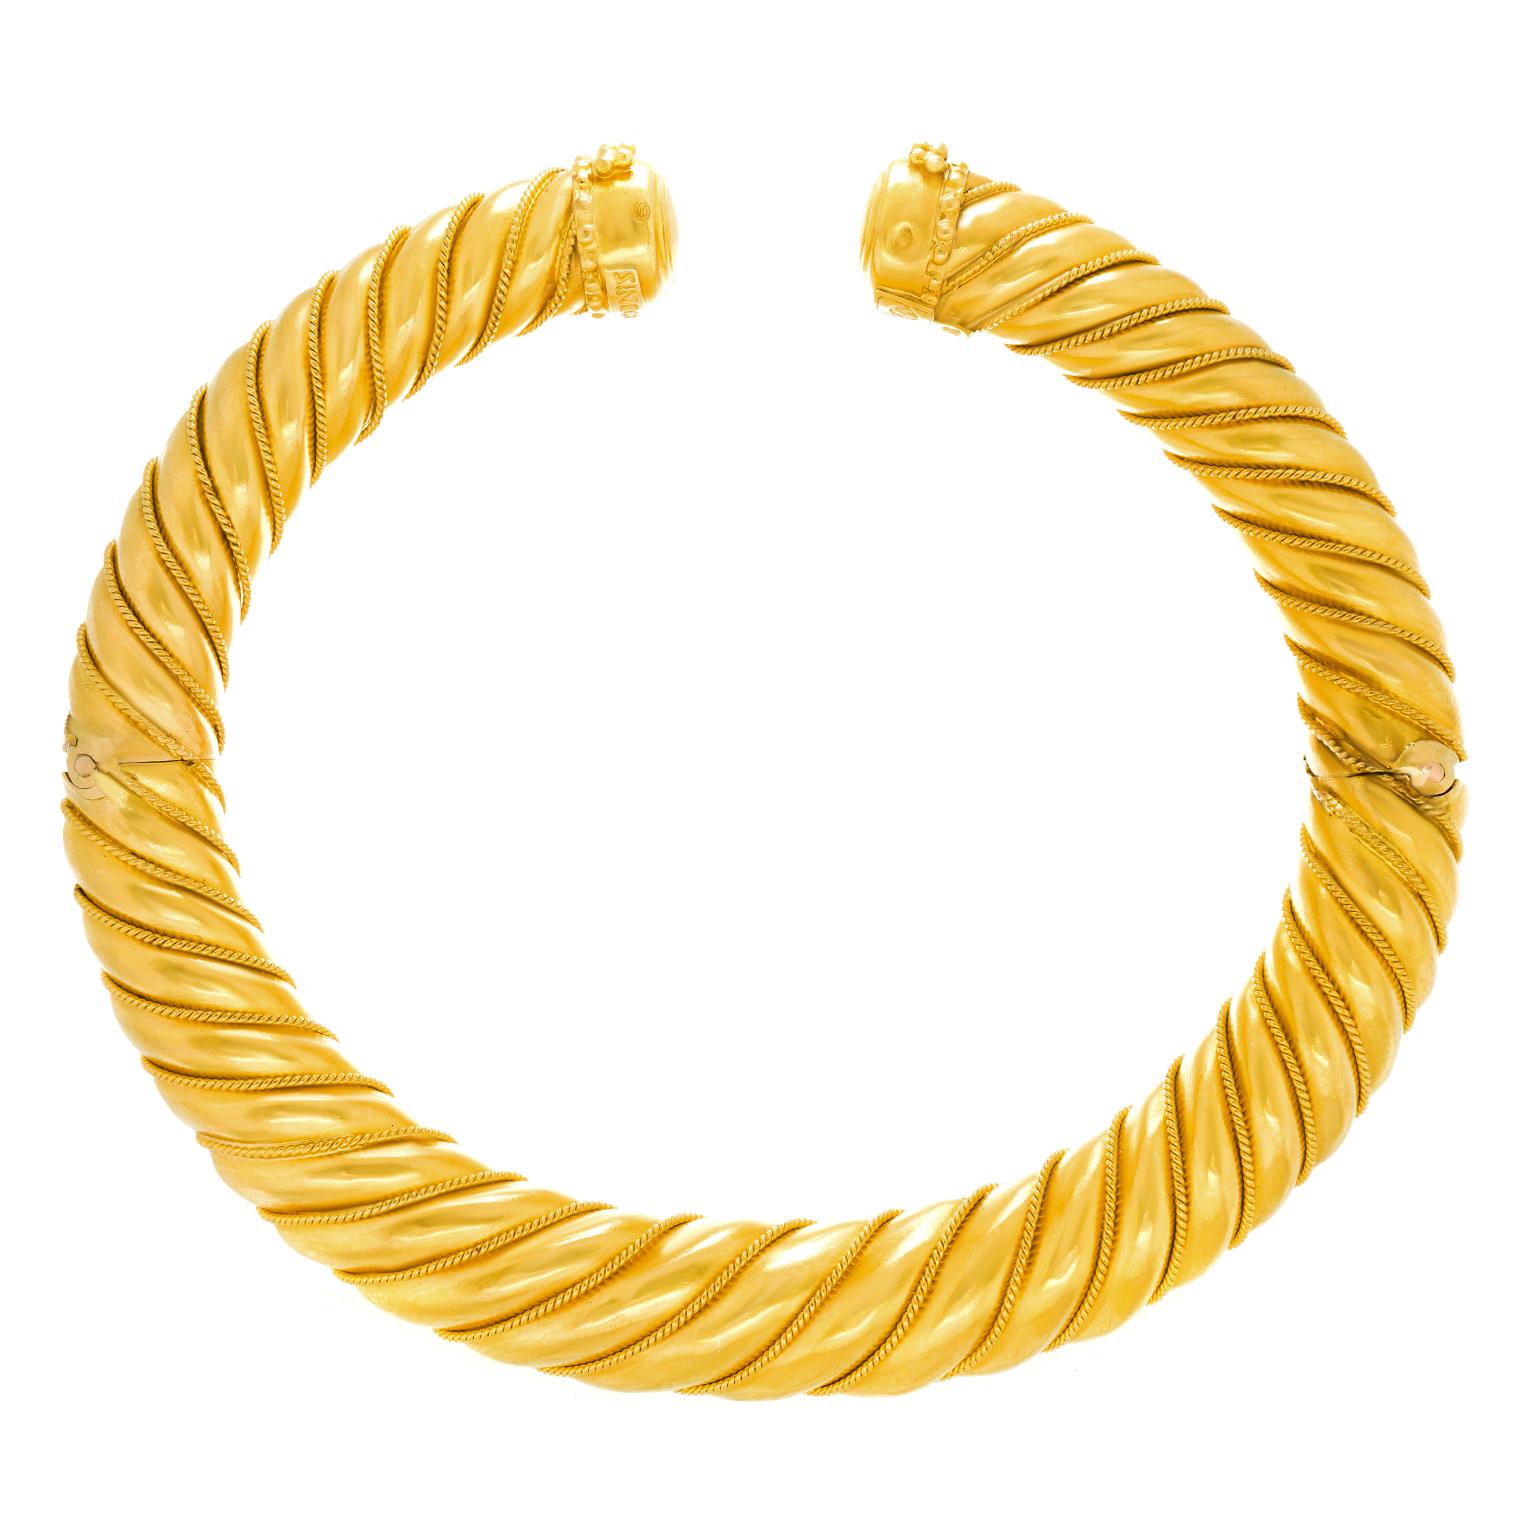 Lalaounis 22k Gold Bracelet In Excellent Condition For Sale In Litchfield, CT